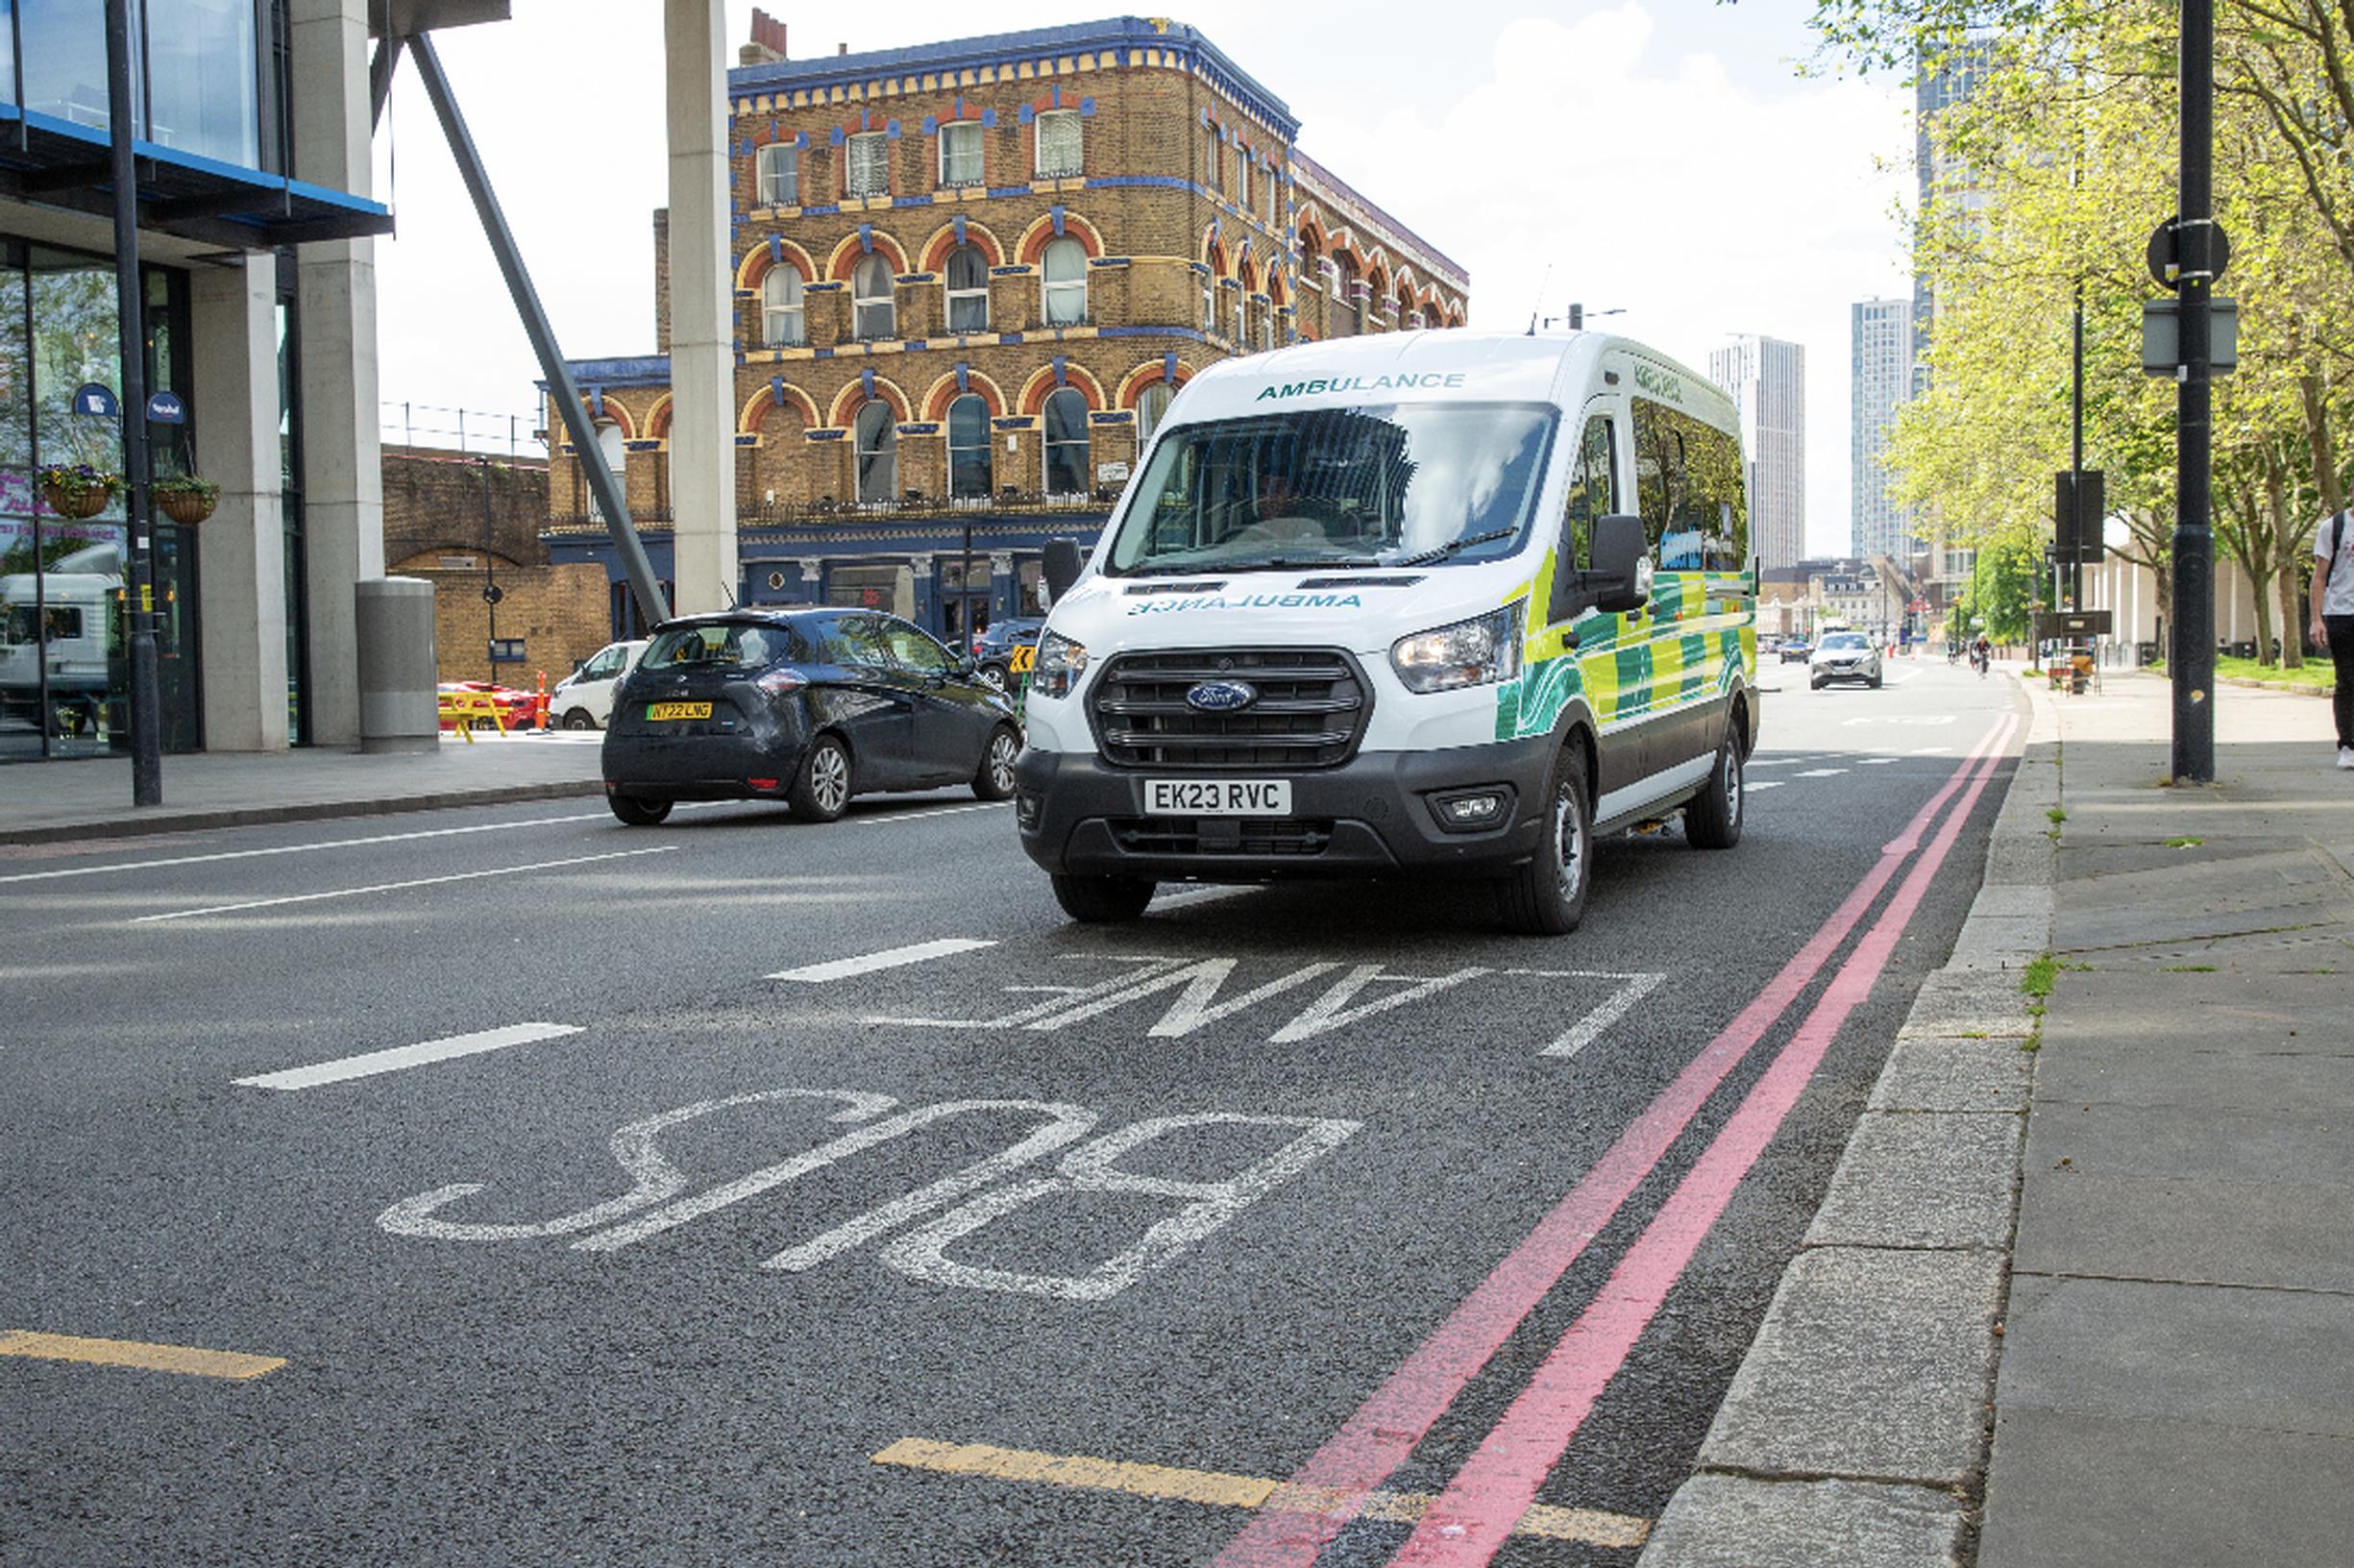 Bus lanes in London are now open to non-emergency ambulances